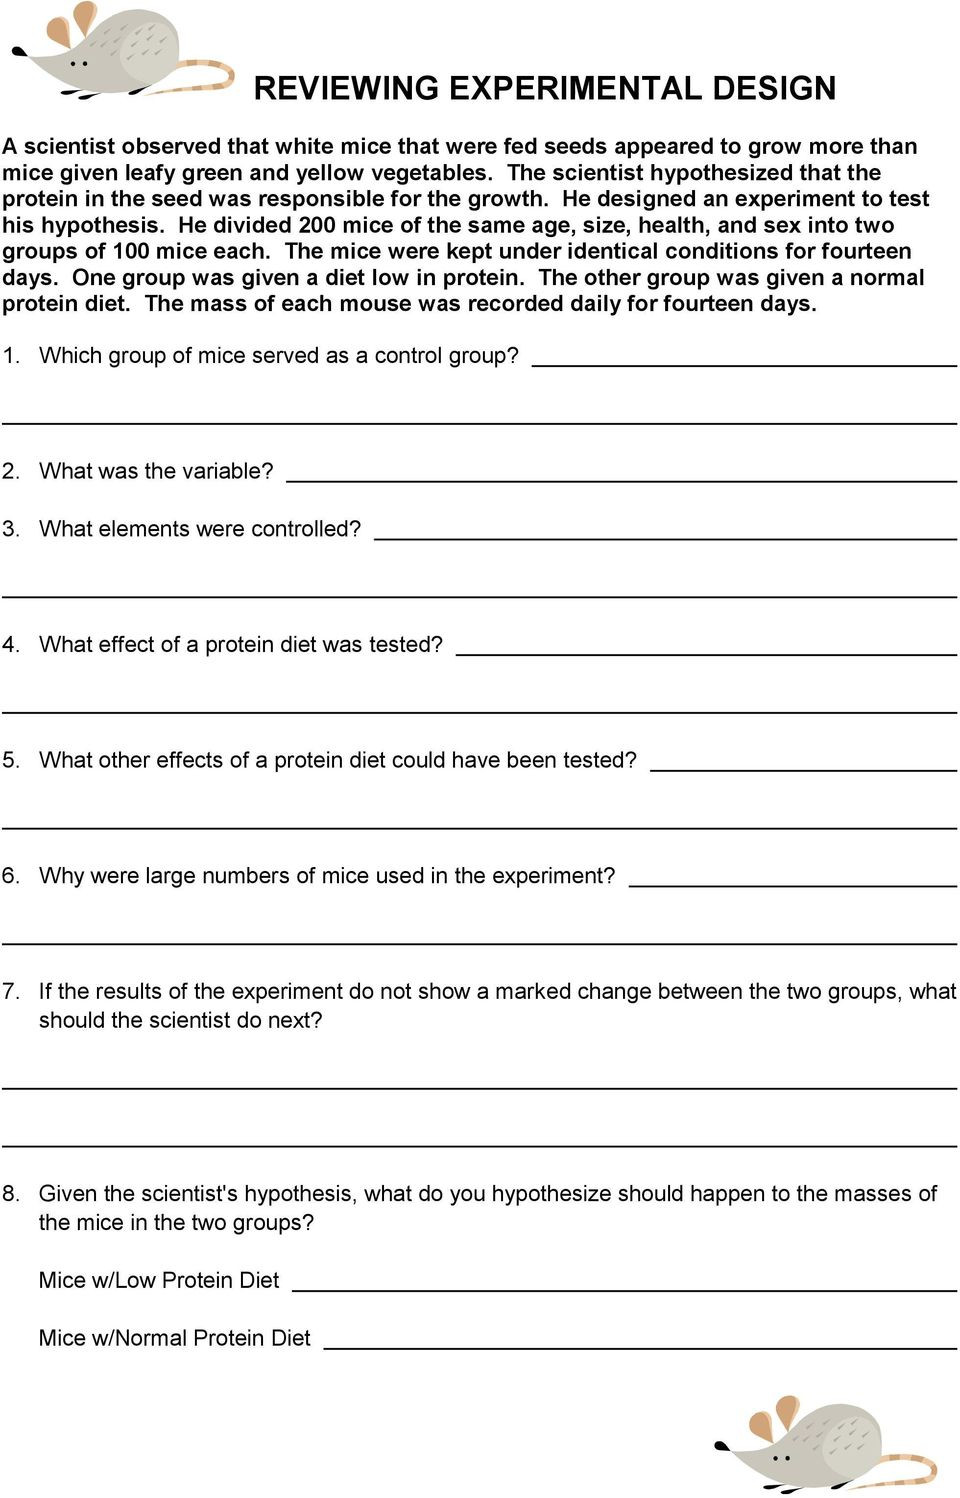 Experimental Design Worksheet Answers the Scientific Method Pdf Free Download